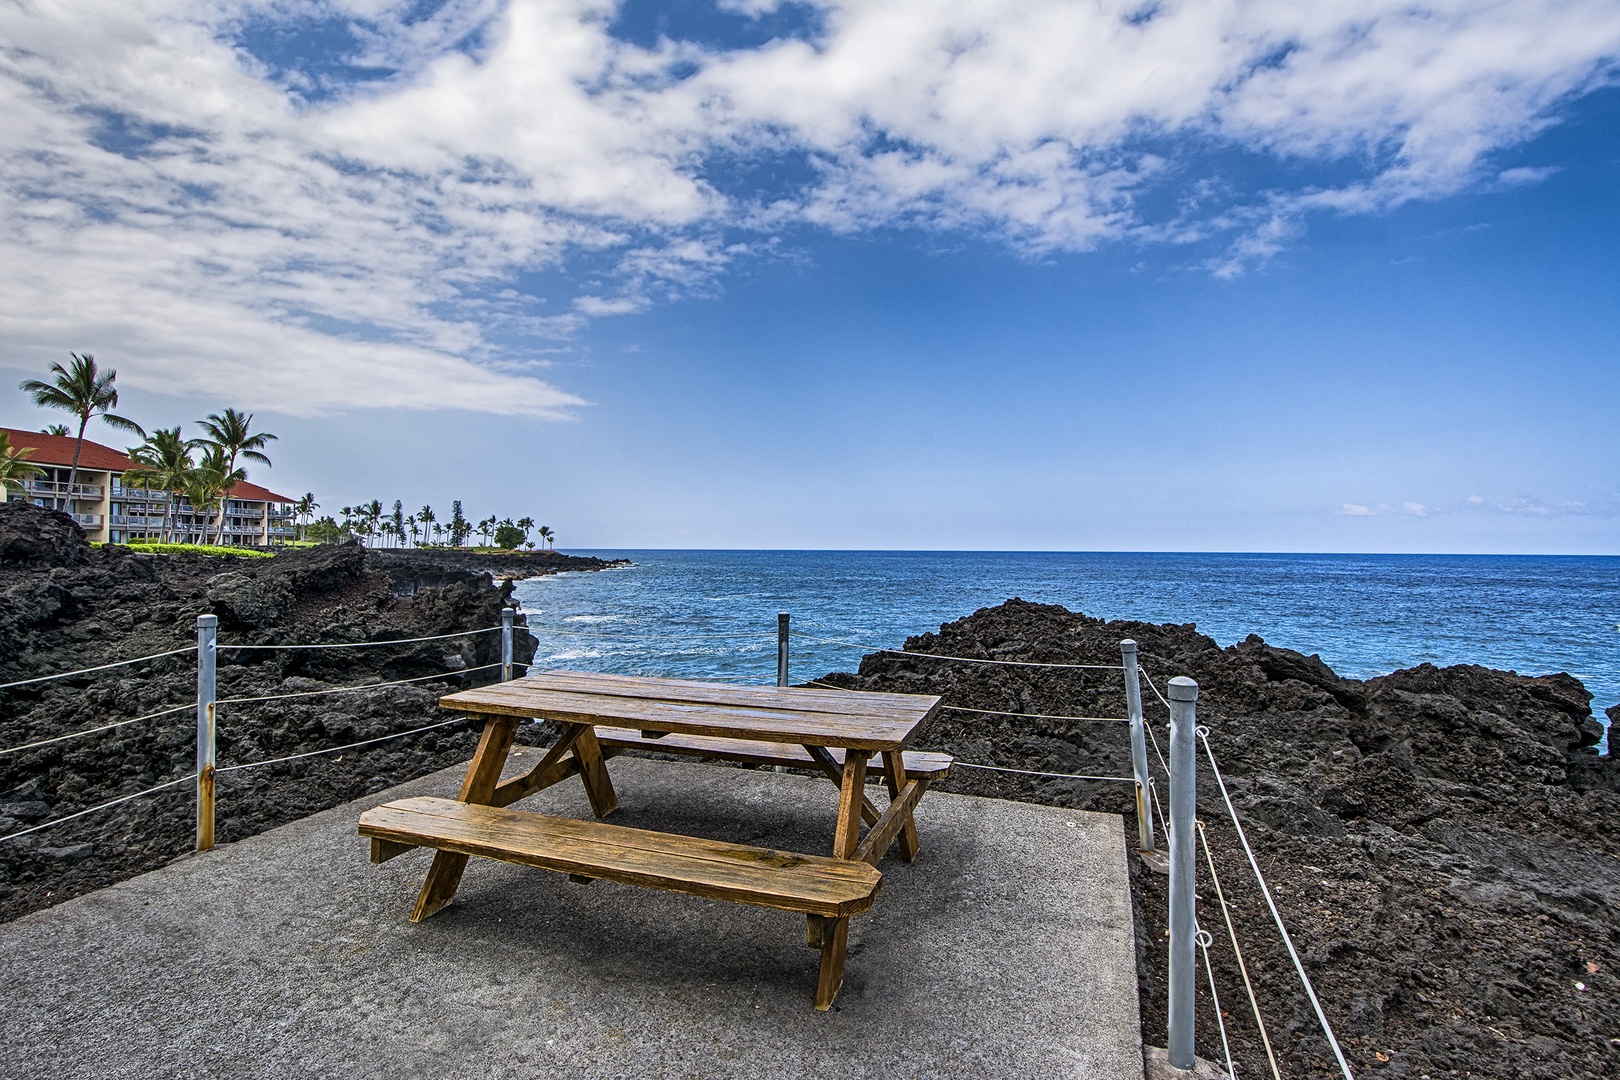 Kailua Kona Vacation Rentals, Keauhou Kona Surf & Racquet #48 - Ocean side seating at the complex provided picnic tables